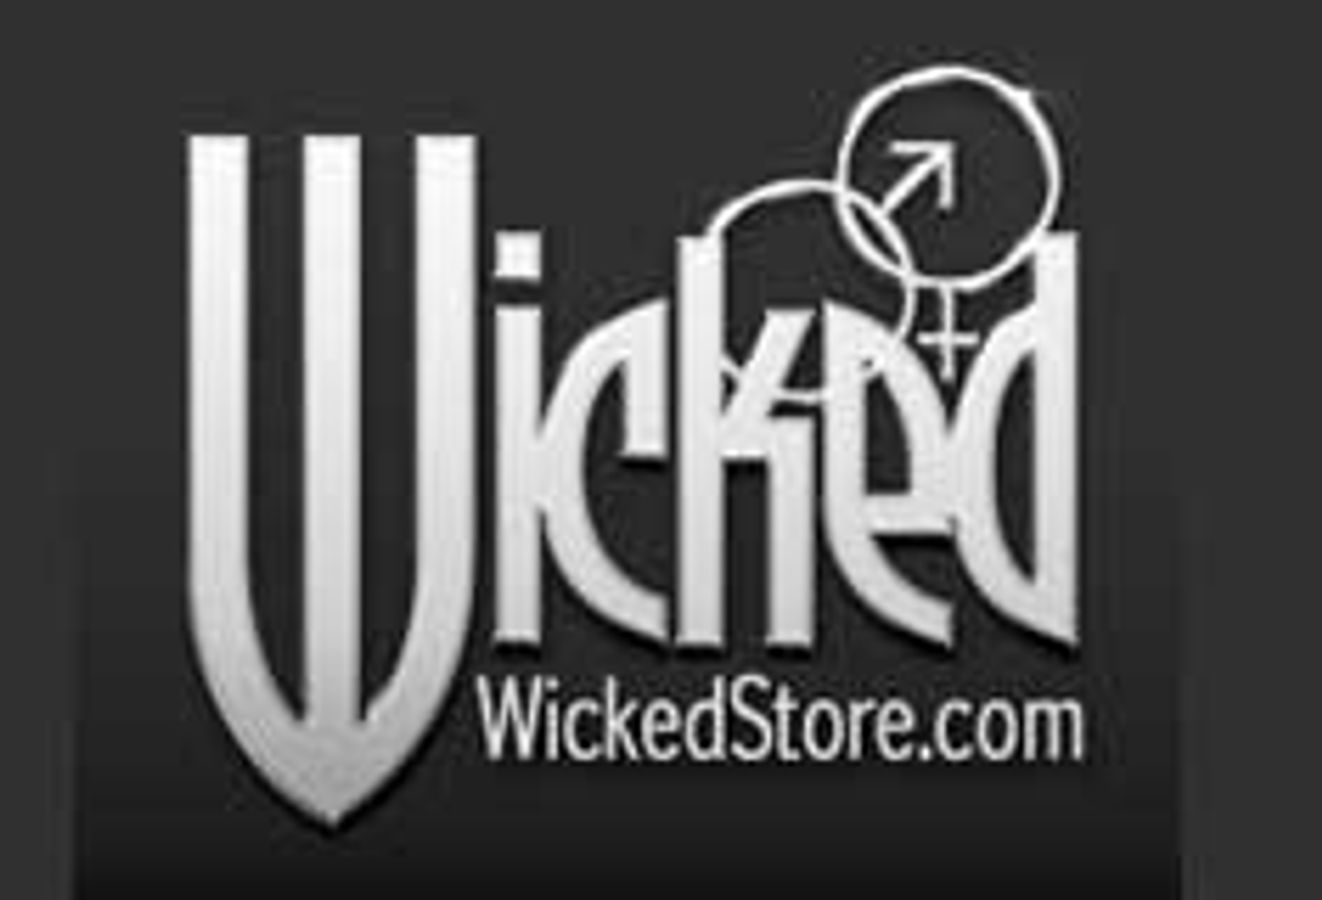 Wicked Store